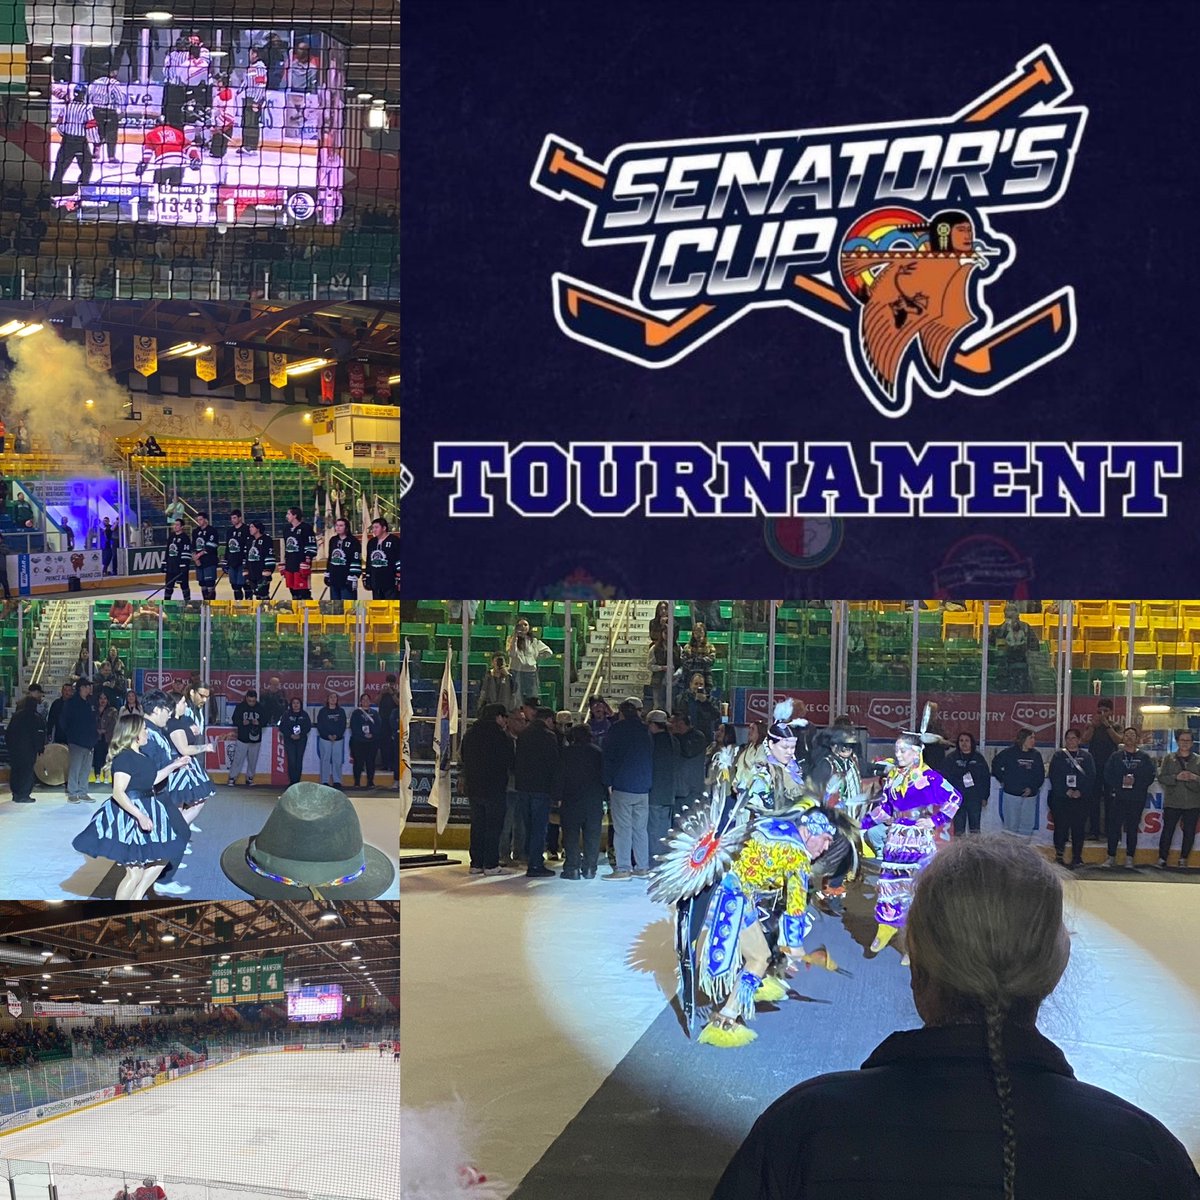 An exceptional display of Indigenous spirit, talent, & determination. Glad to be part of the opening ceremonies at the 2024 Senators Cup! There's just something about a hockey rink that brings people together. A special thanks to the PAGC for the invitation to participate..